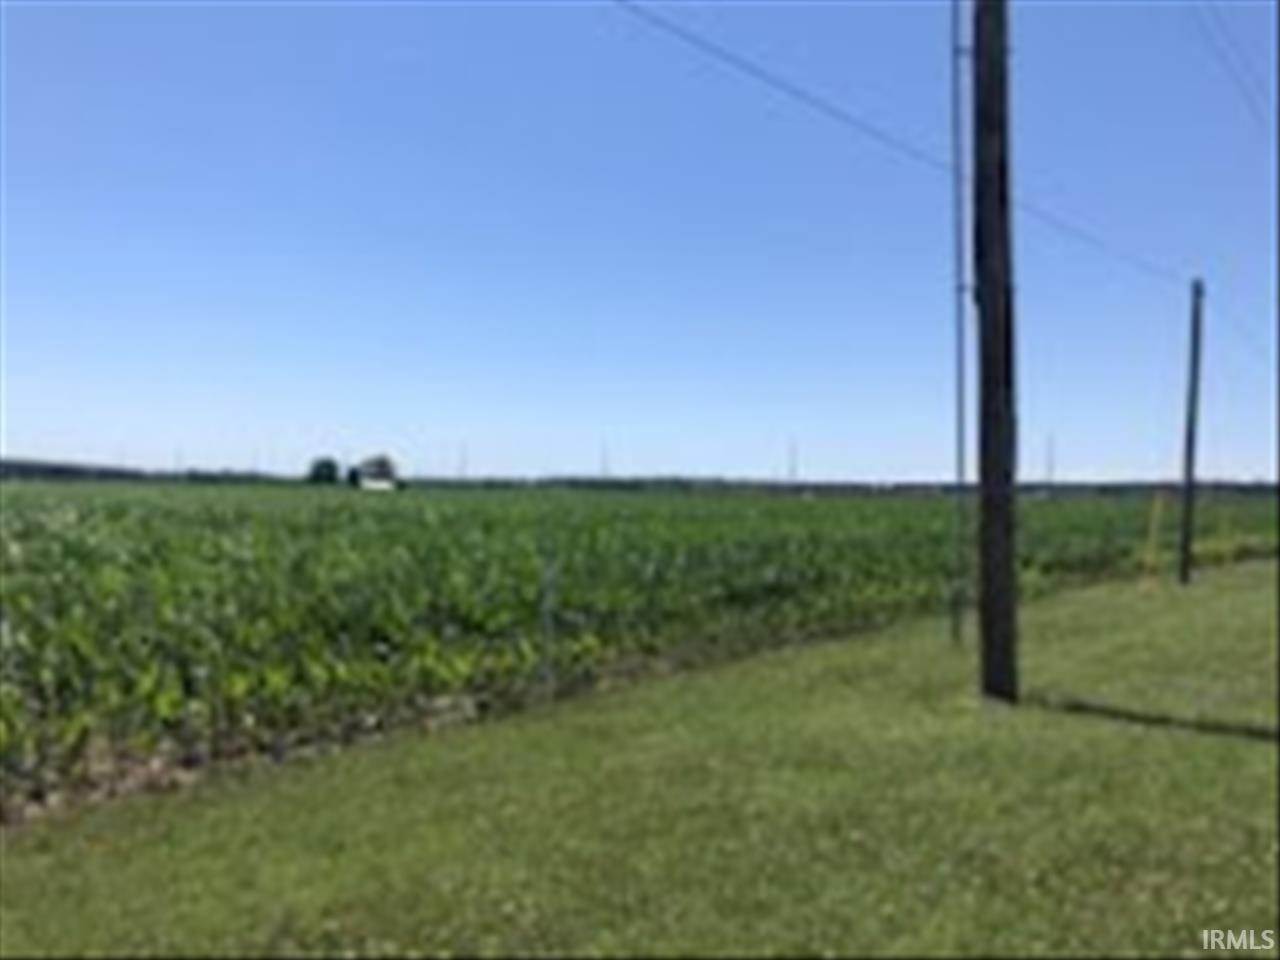 19. Agricultural Land for Sale at 10488 Oak Grove Road Newburgh, Indiana 47630 United States